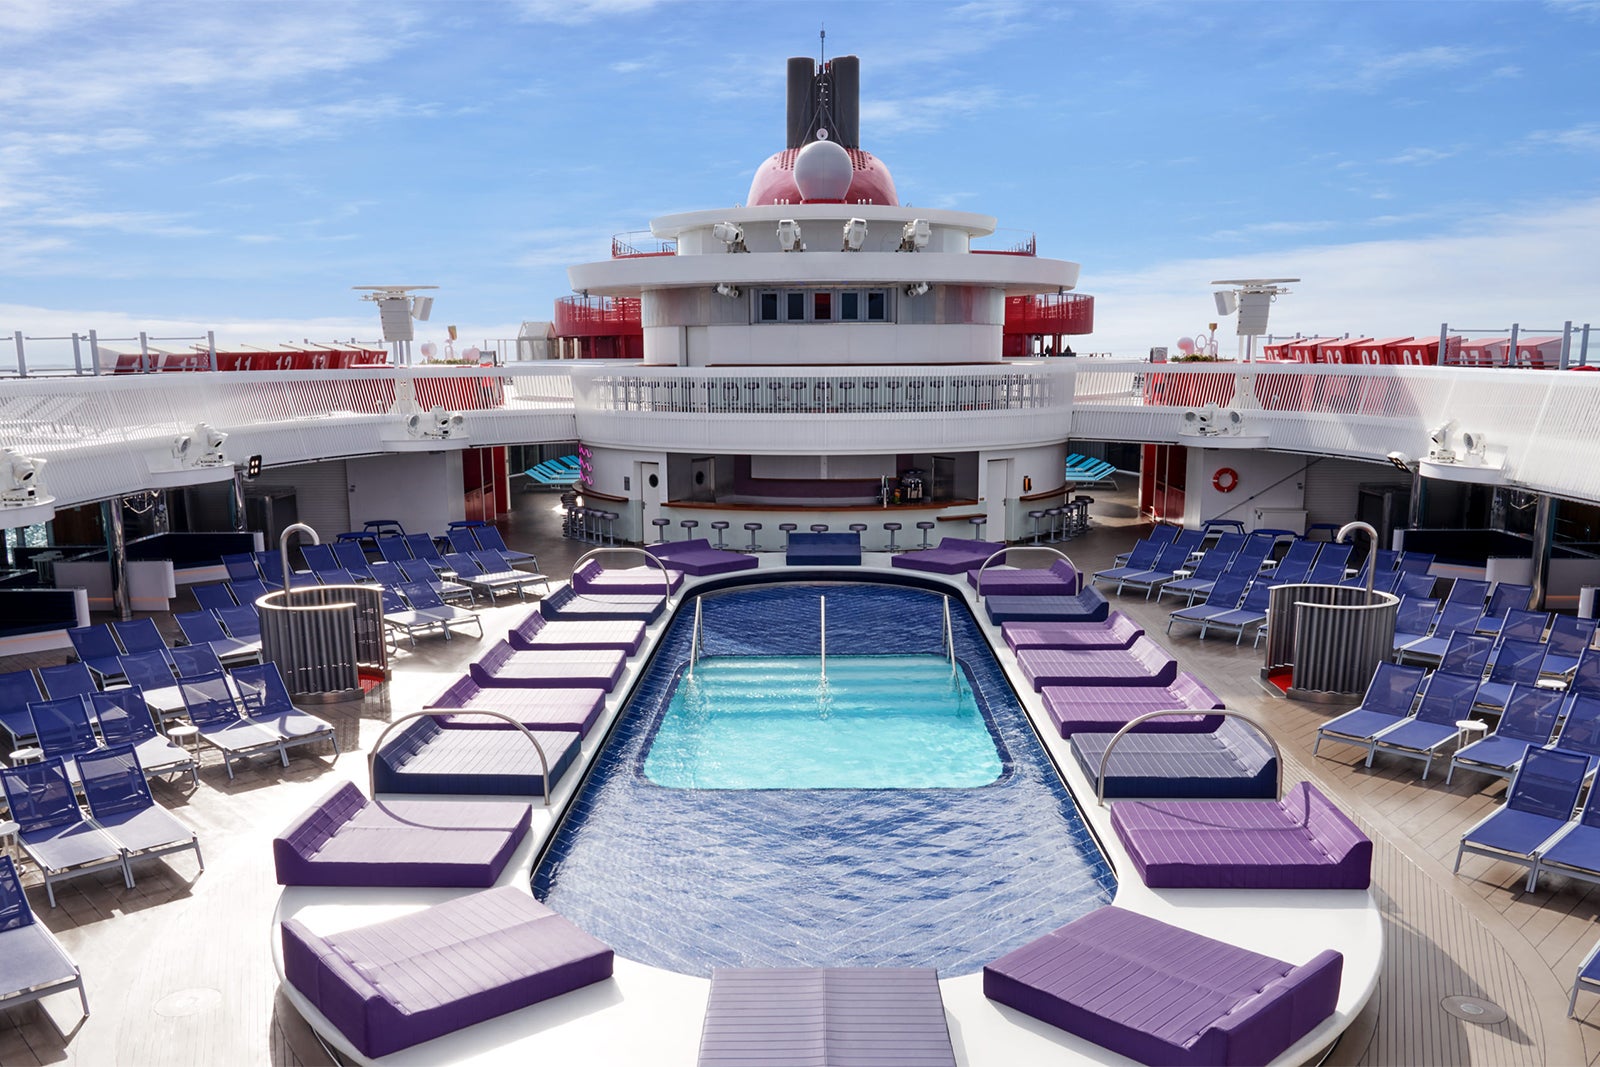 Pool deck on Virgin Voyages cruise ship